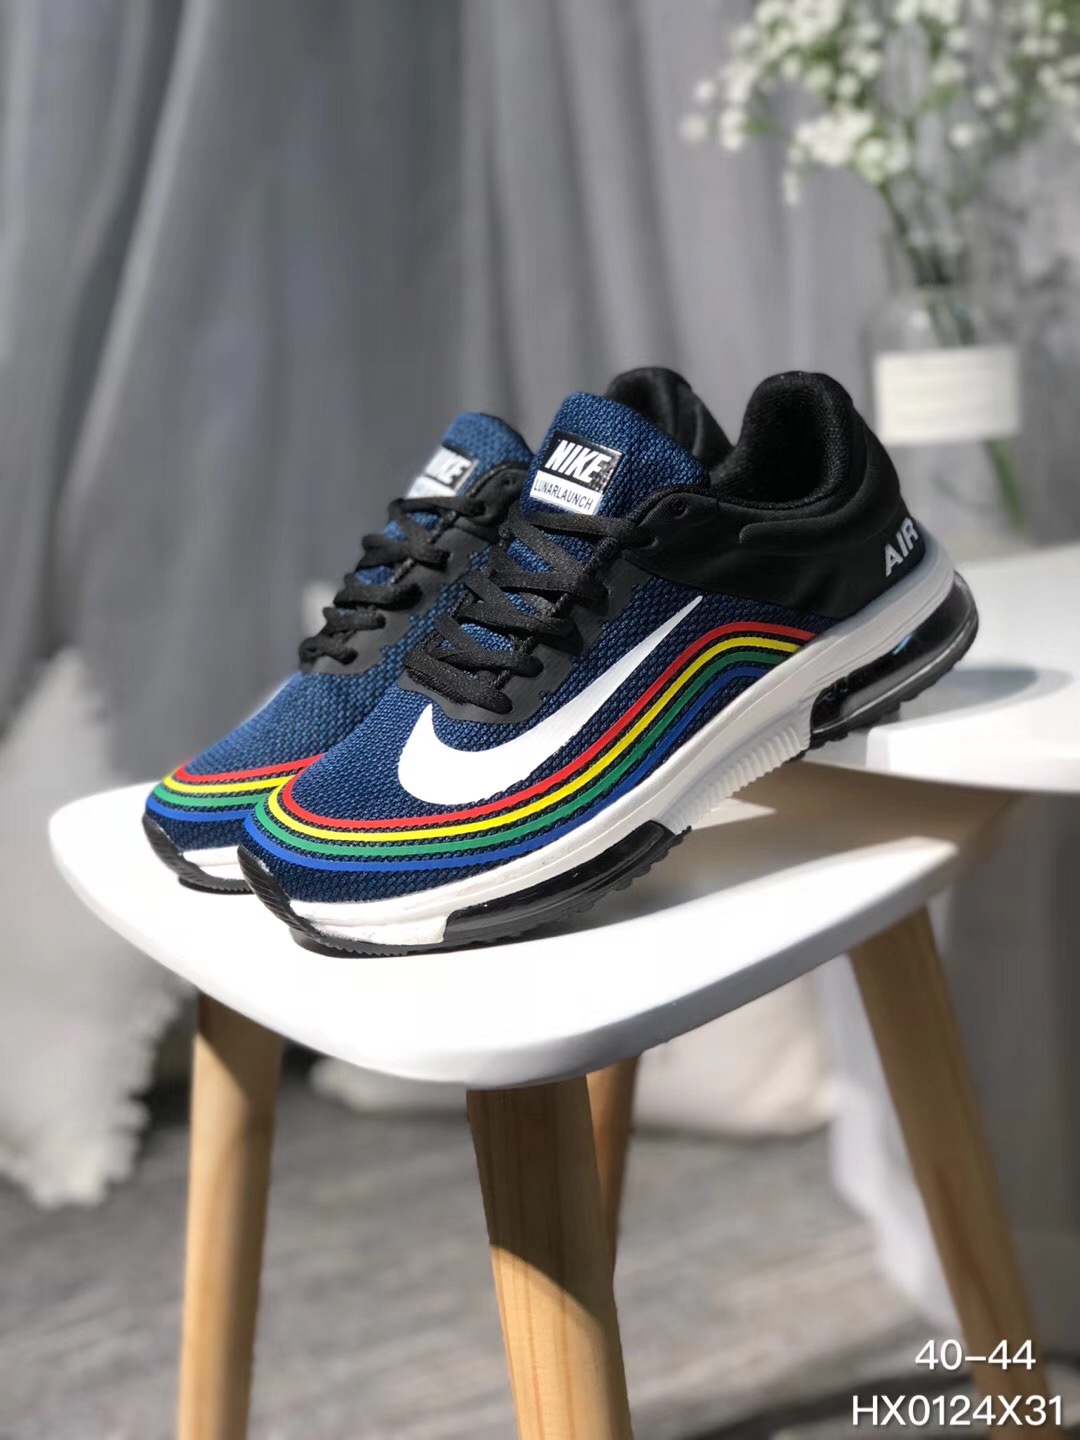 Nike Air Max 2018 Flyknit Blue Black Yellow Red Running Shoes - Click Image to Close